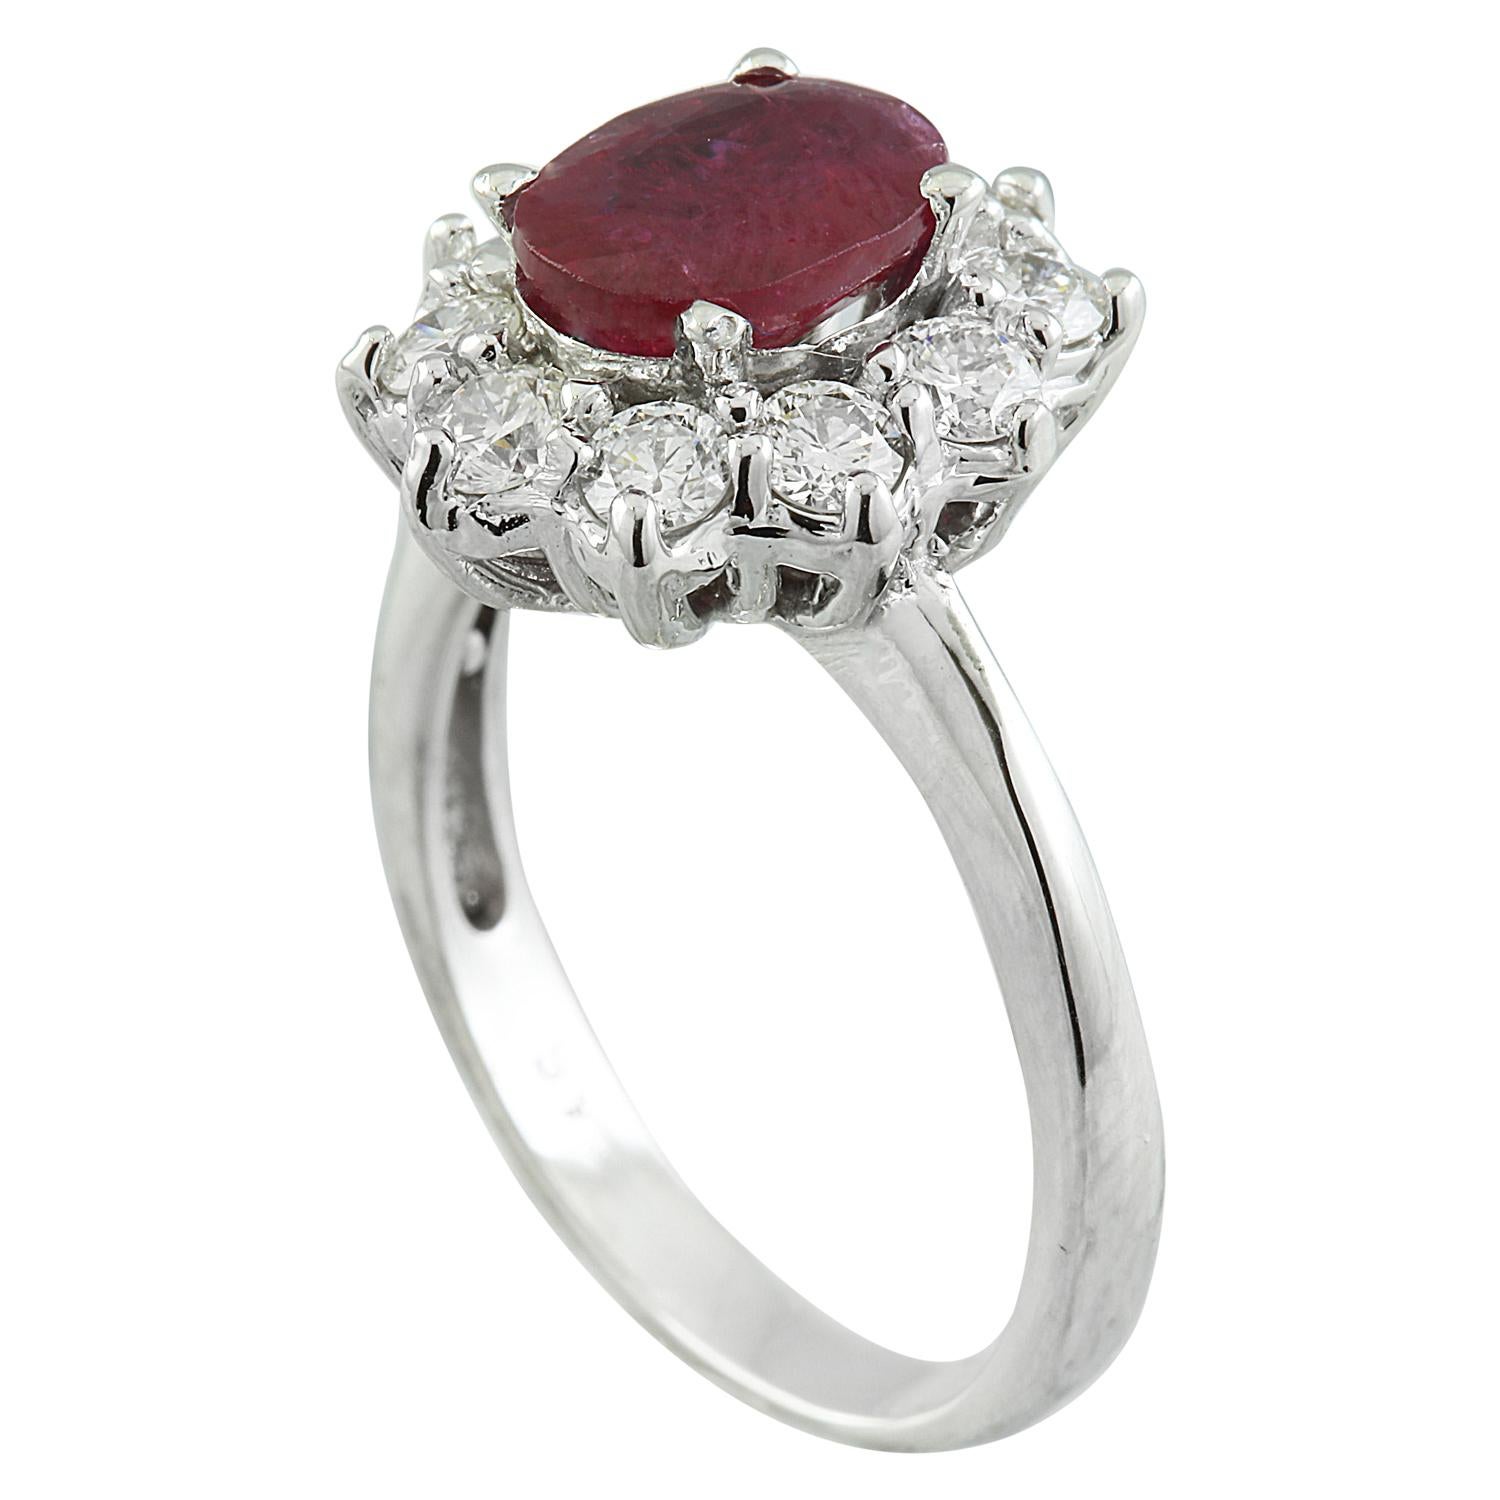 2.81 Carat Natural Ruby 14 Karat Solid White Gold Diamond Ring
Stamped: 14K
Total Ring Weight: 5.1 Grams 
Ruby Weight: 2.01 Carat (9.00x7.00 Millimeters)  
Diamond Weight: 0.80 Carat (F-G Color, VS2-SI1 Clarity )
quantity: 10
Face Measures: